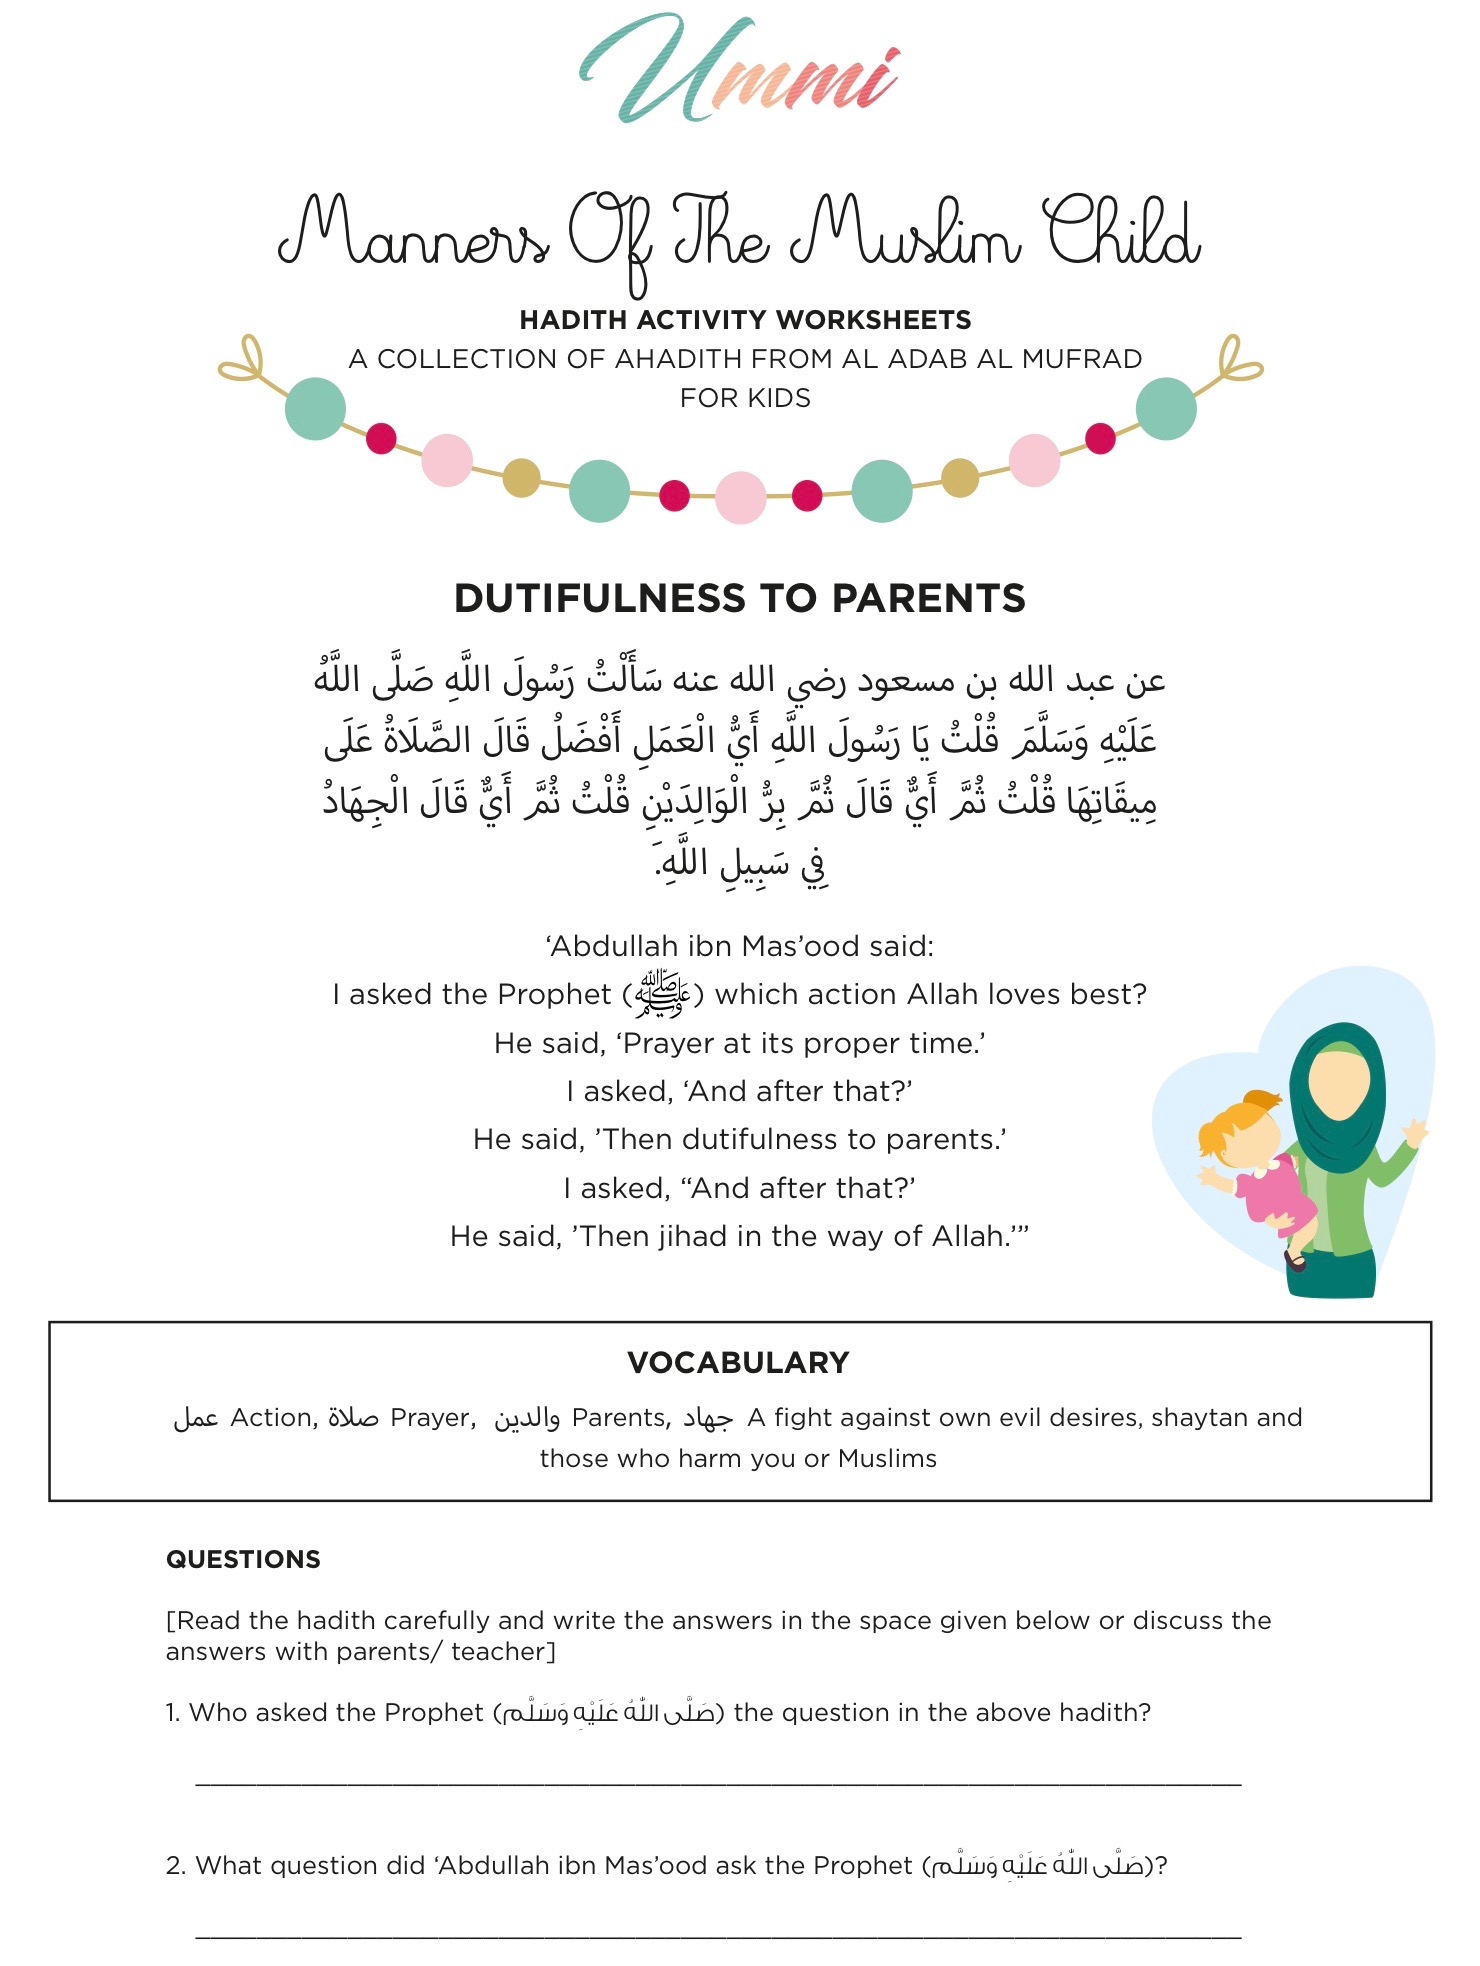 hadith activity worksheets for kids ummi islamic parenting education